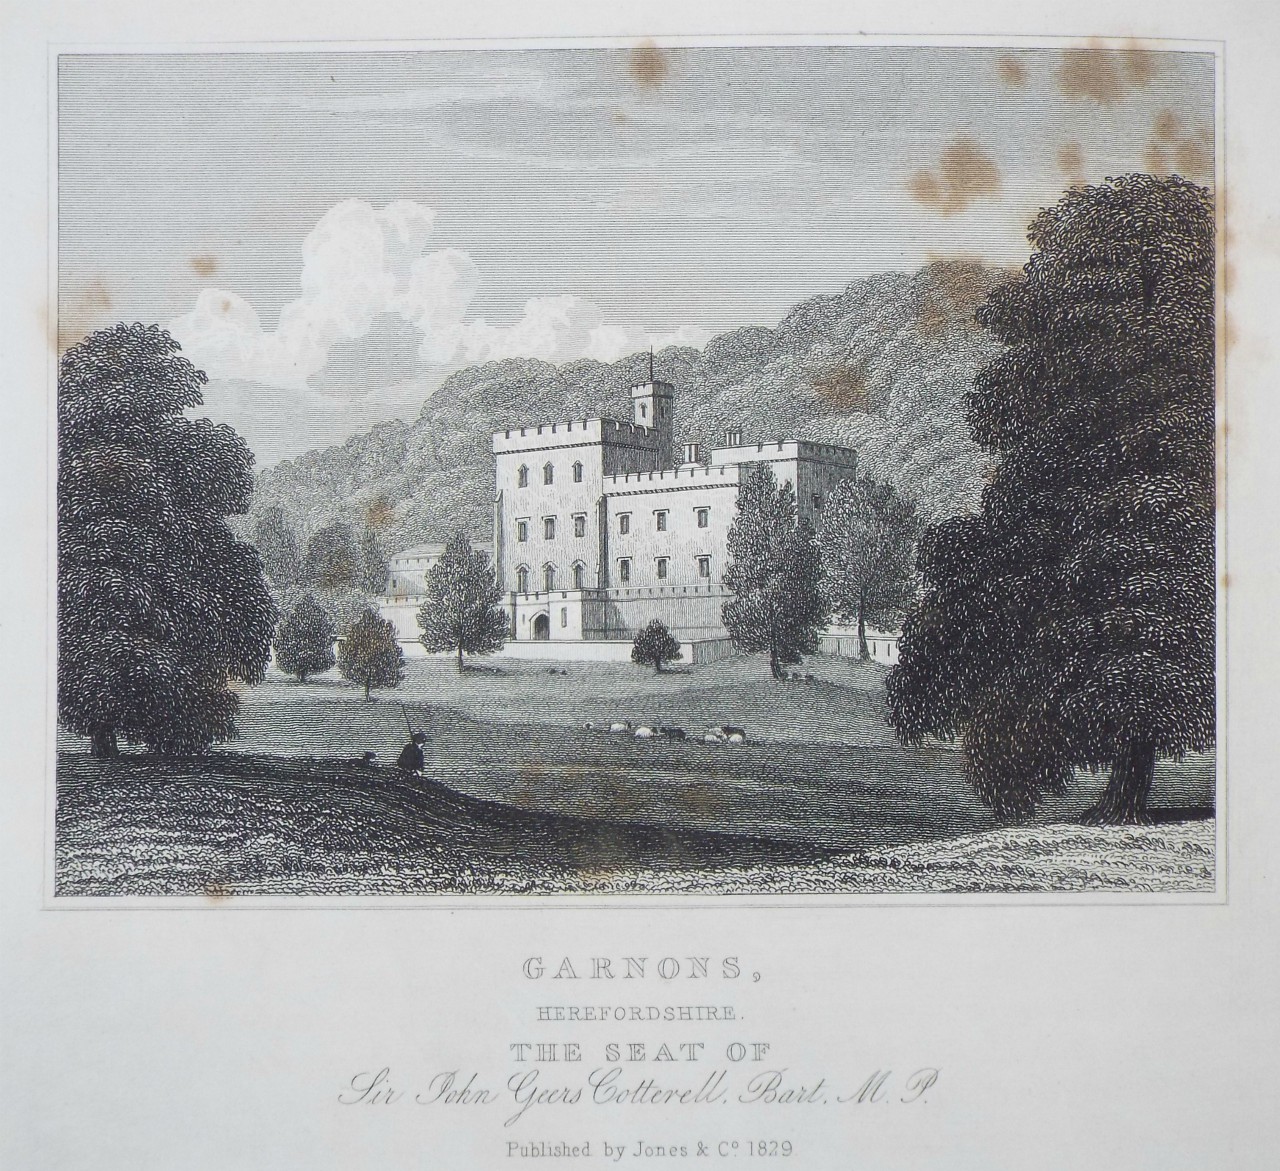 Print - Garnons, Herefordshire. The Seat of Sir John Geers Cotterell, Bart. M.P. - Taylor